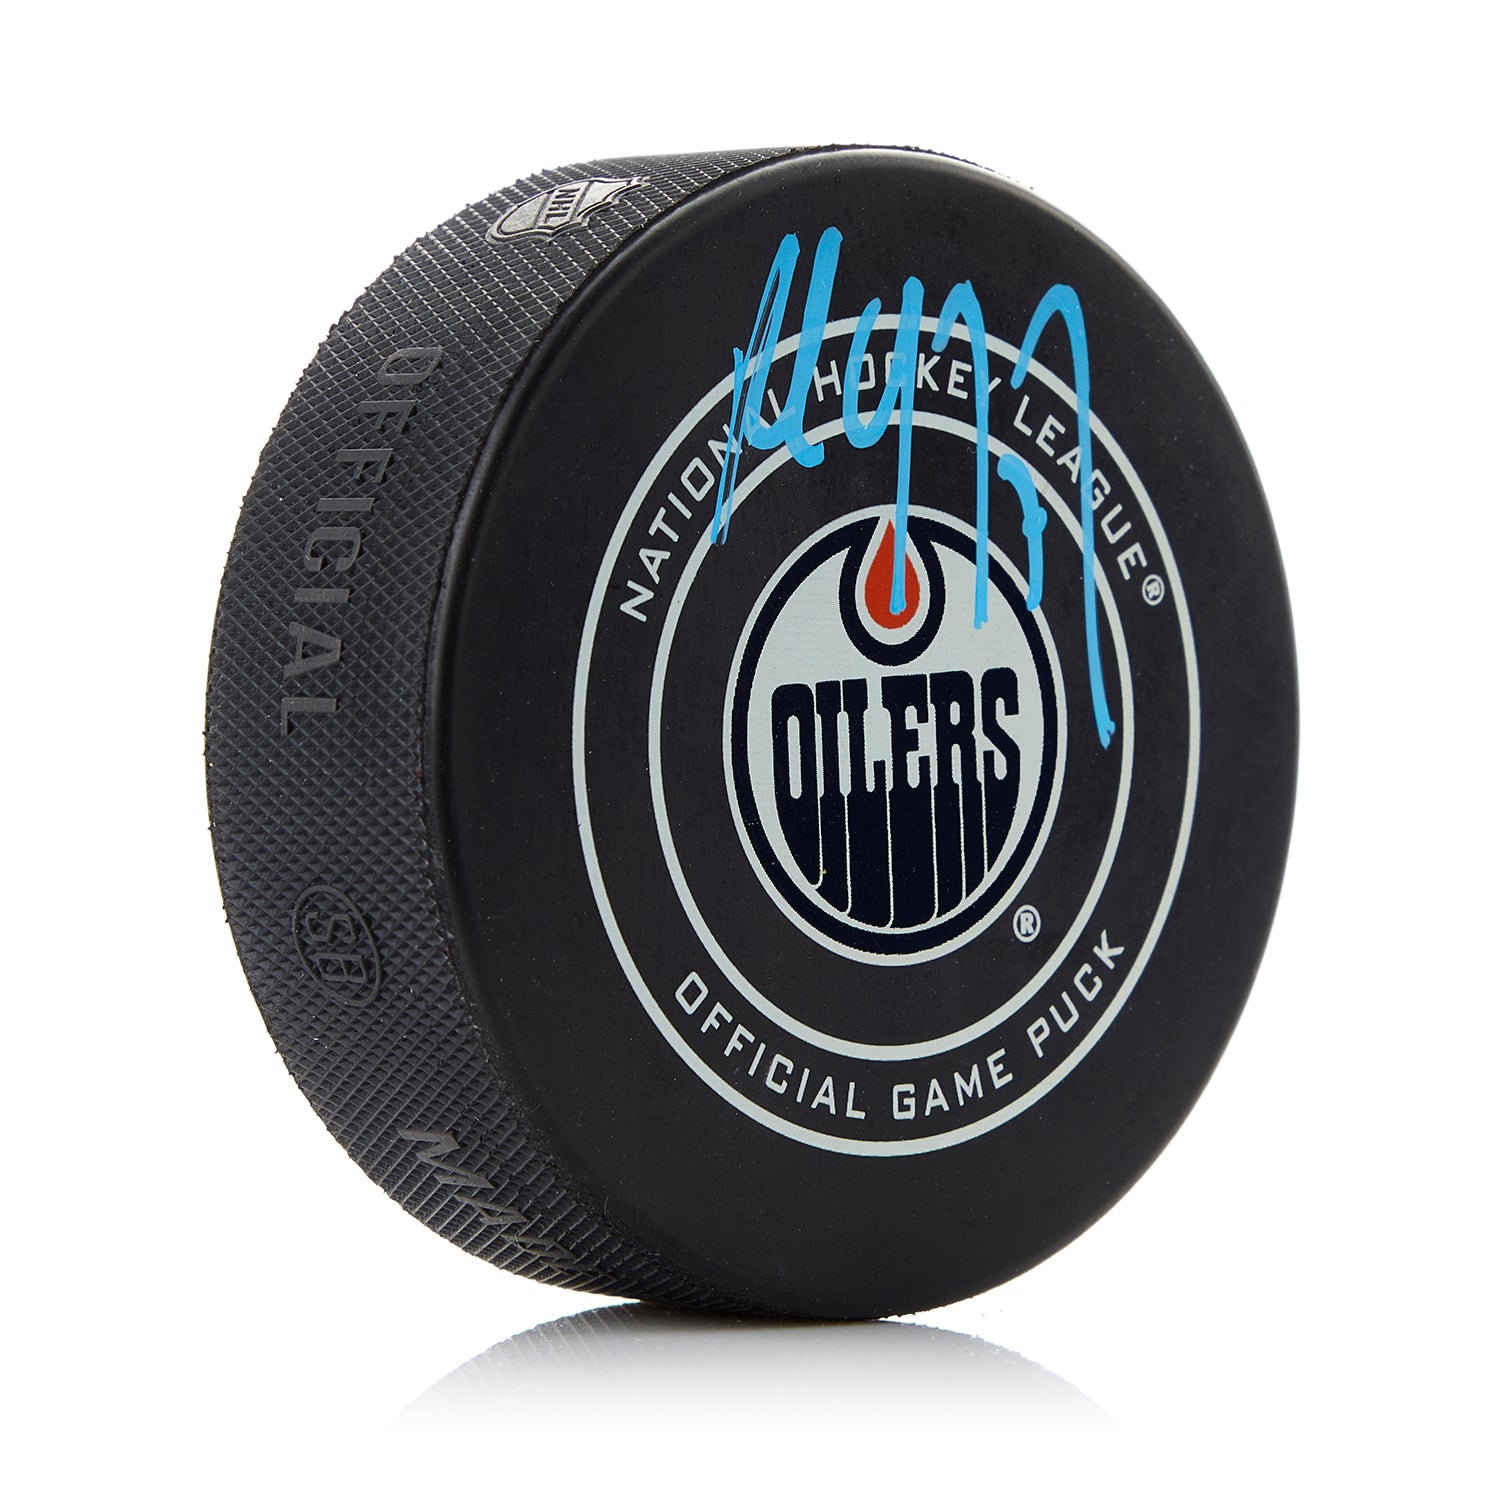 Paul Coffey Edmonton Oilers Autographed Official Game Puck